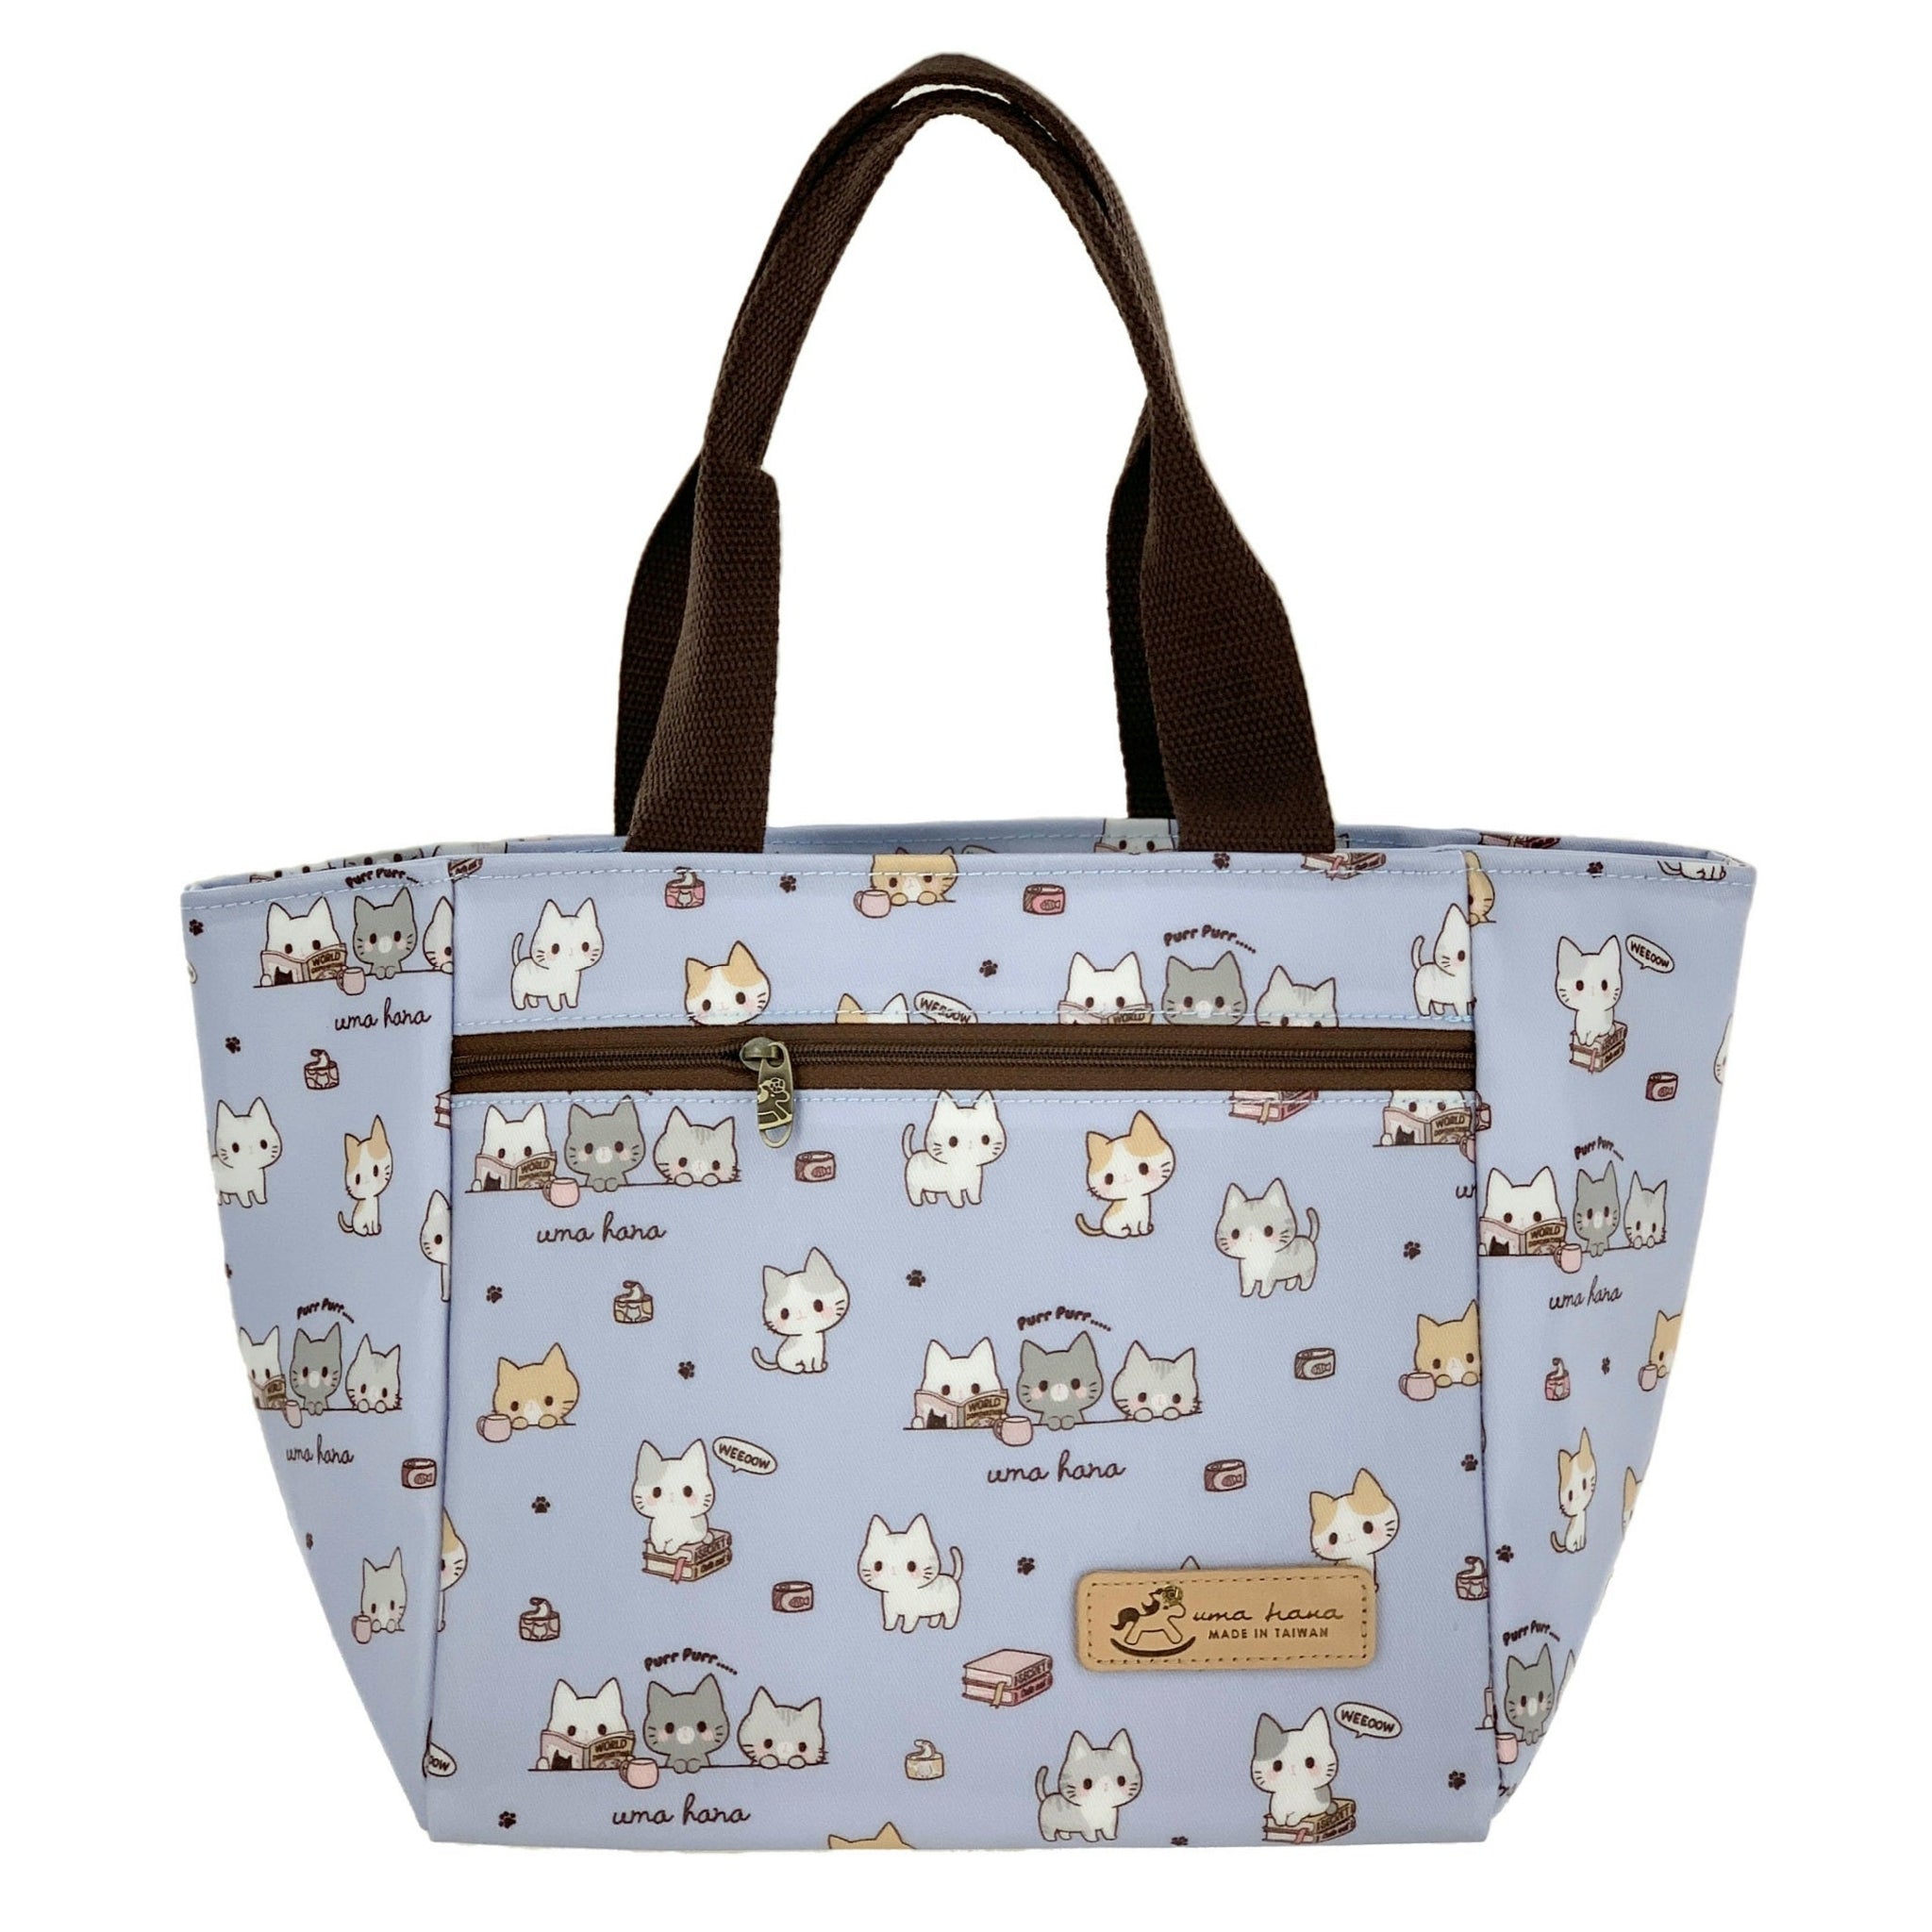 Periwinkle Blue Meow Cat Insulated Lunch Tote